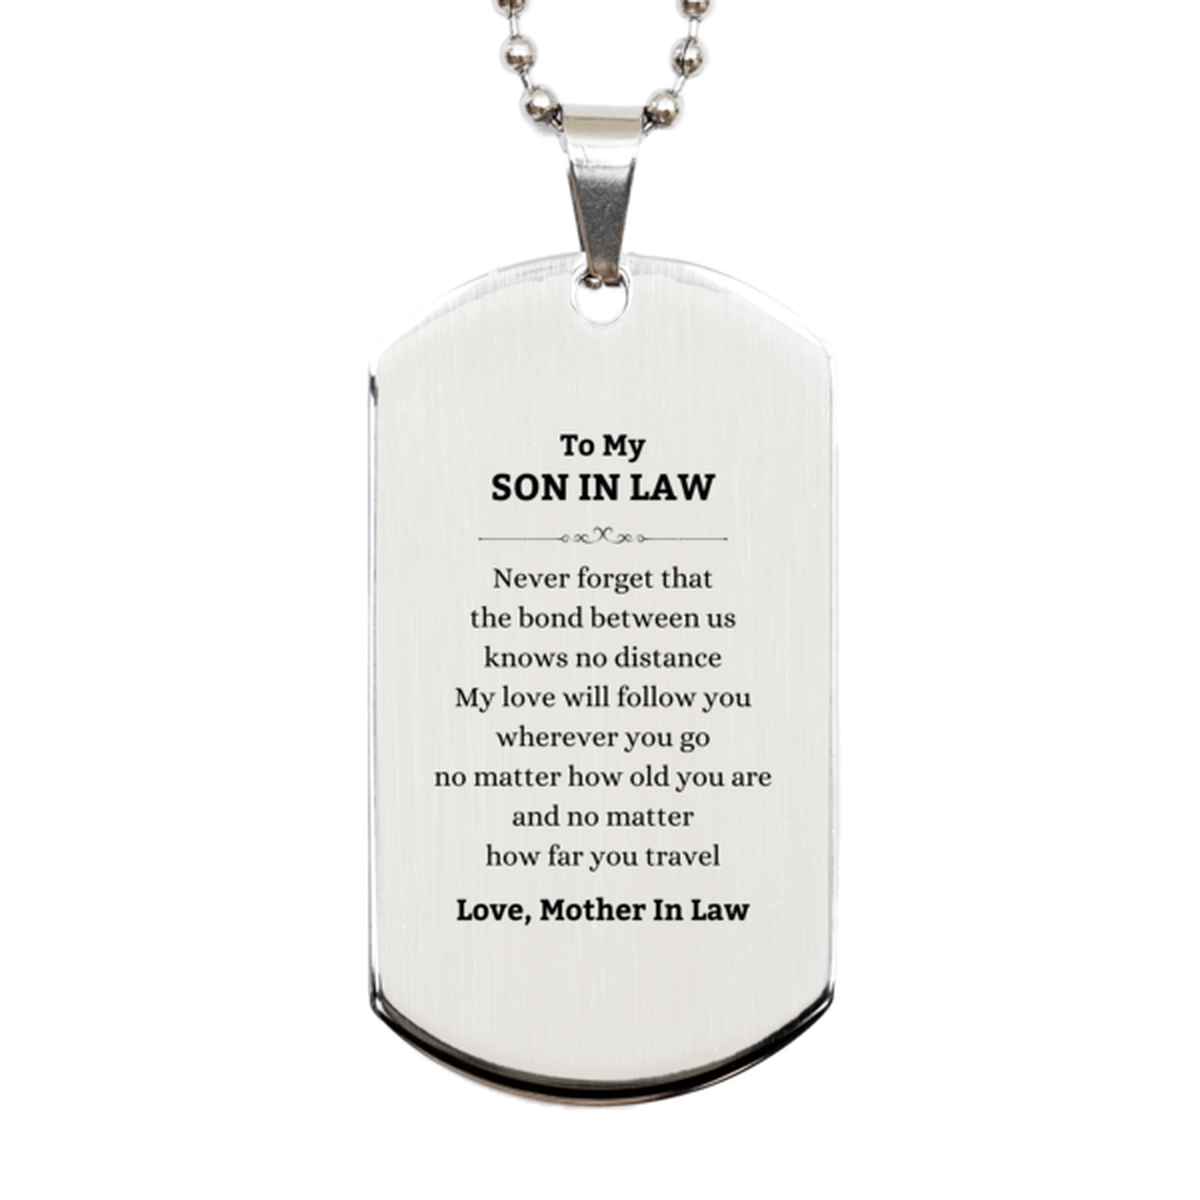 Son In Law Birthday Gifts from Mother In Law, Adjustable Silver Dog Tag for Son In Law Christmas Graduation Unique Gifts Son In Law Never forget that the bond between us knows no distance. Love, Mother In Law